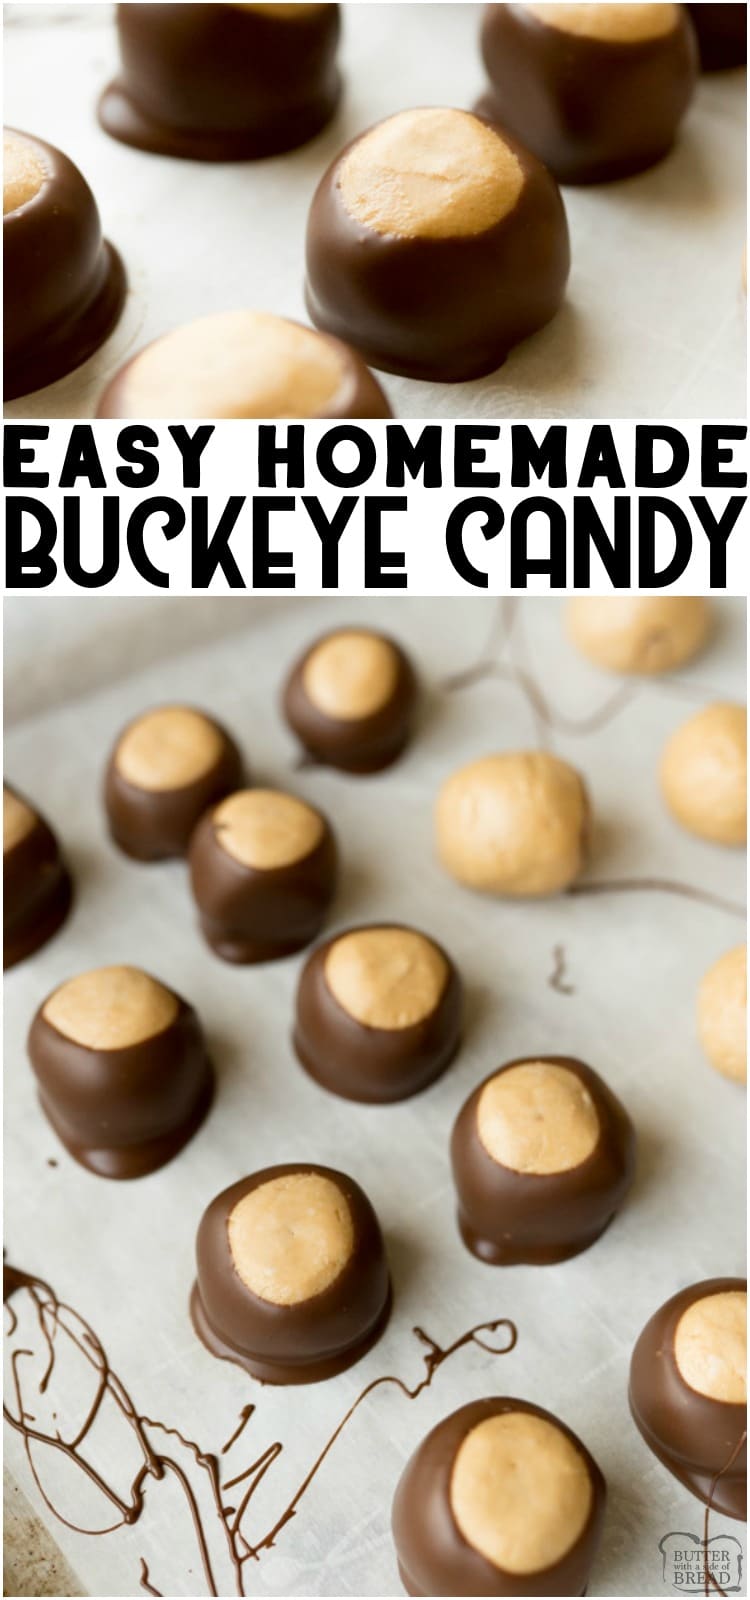 Buckeye Candy Recipe is a simple, no bake dessert. Buckeye balls are fudge-like peanut butter ball is dipped into melted chocolate to make this classic buckeye recipe. #buckceyerecipe #buckeyeballs #buckeyecandy #nobake #peanutbutter #chocolate #easydessert #recipefrom Butter With a Side of Bread